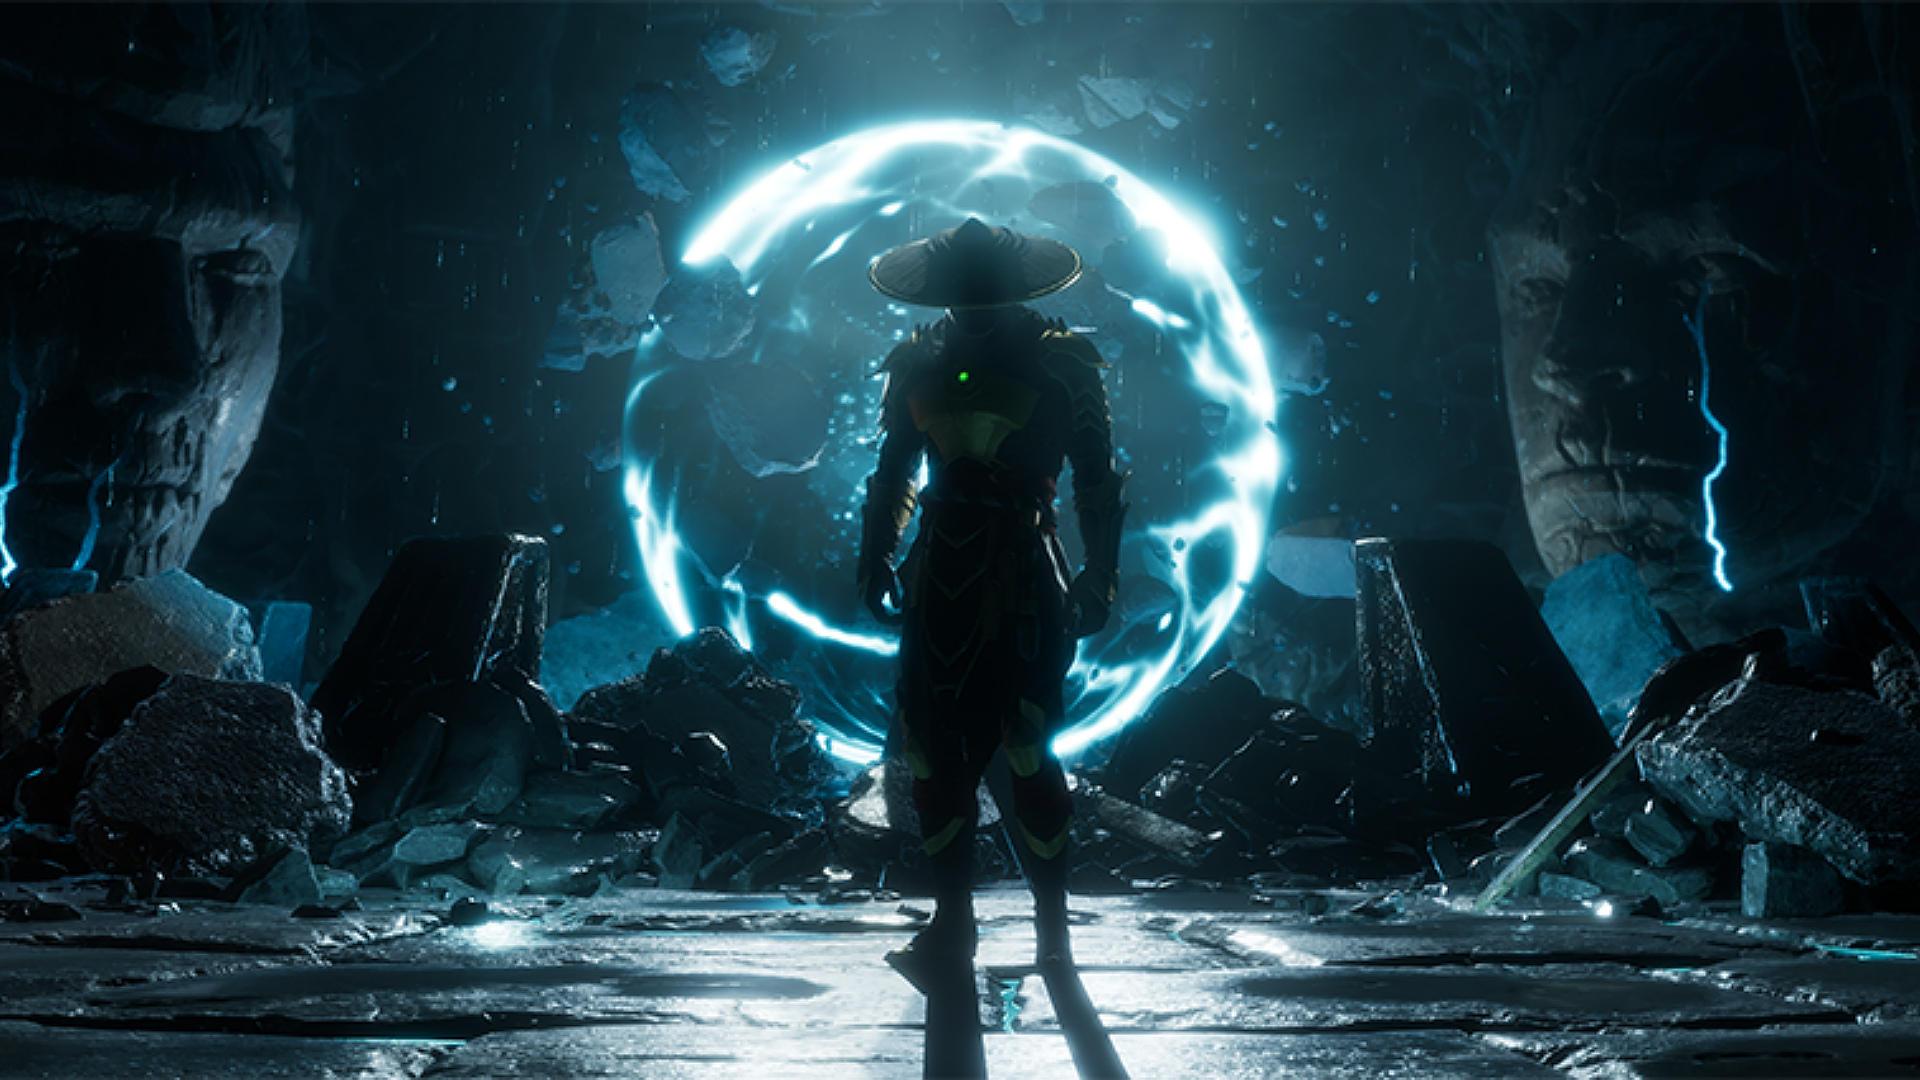 Mortal Kombat 11 Is a Good Game Shrouded in a Fog of Tedious